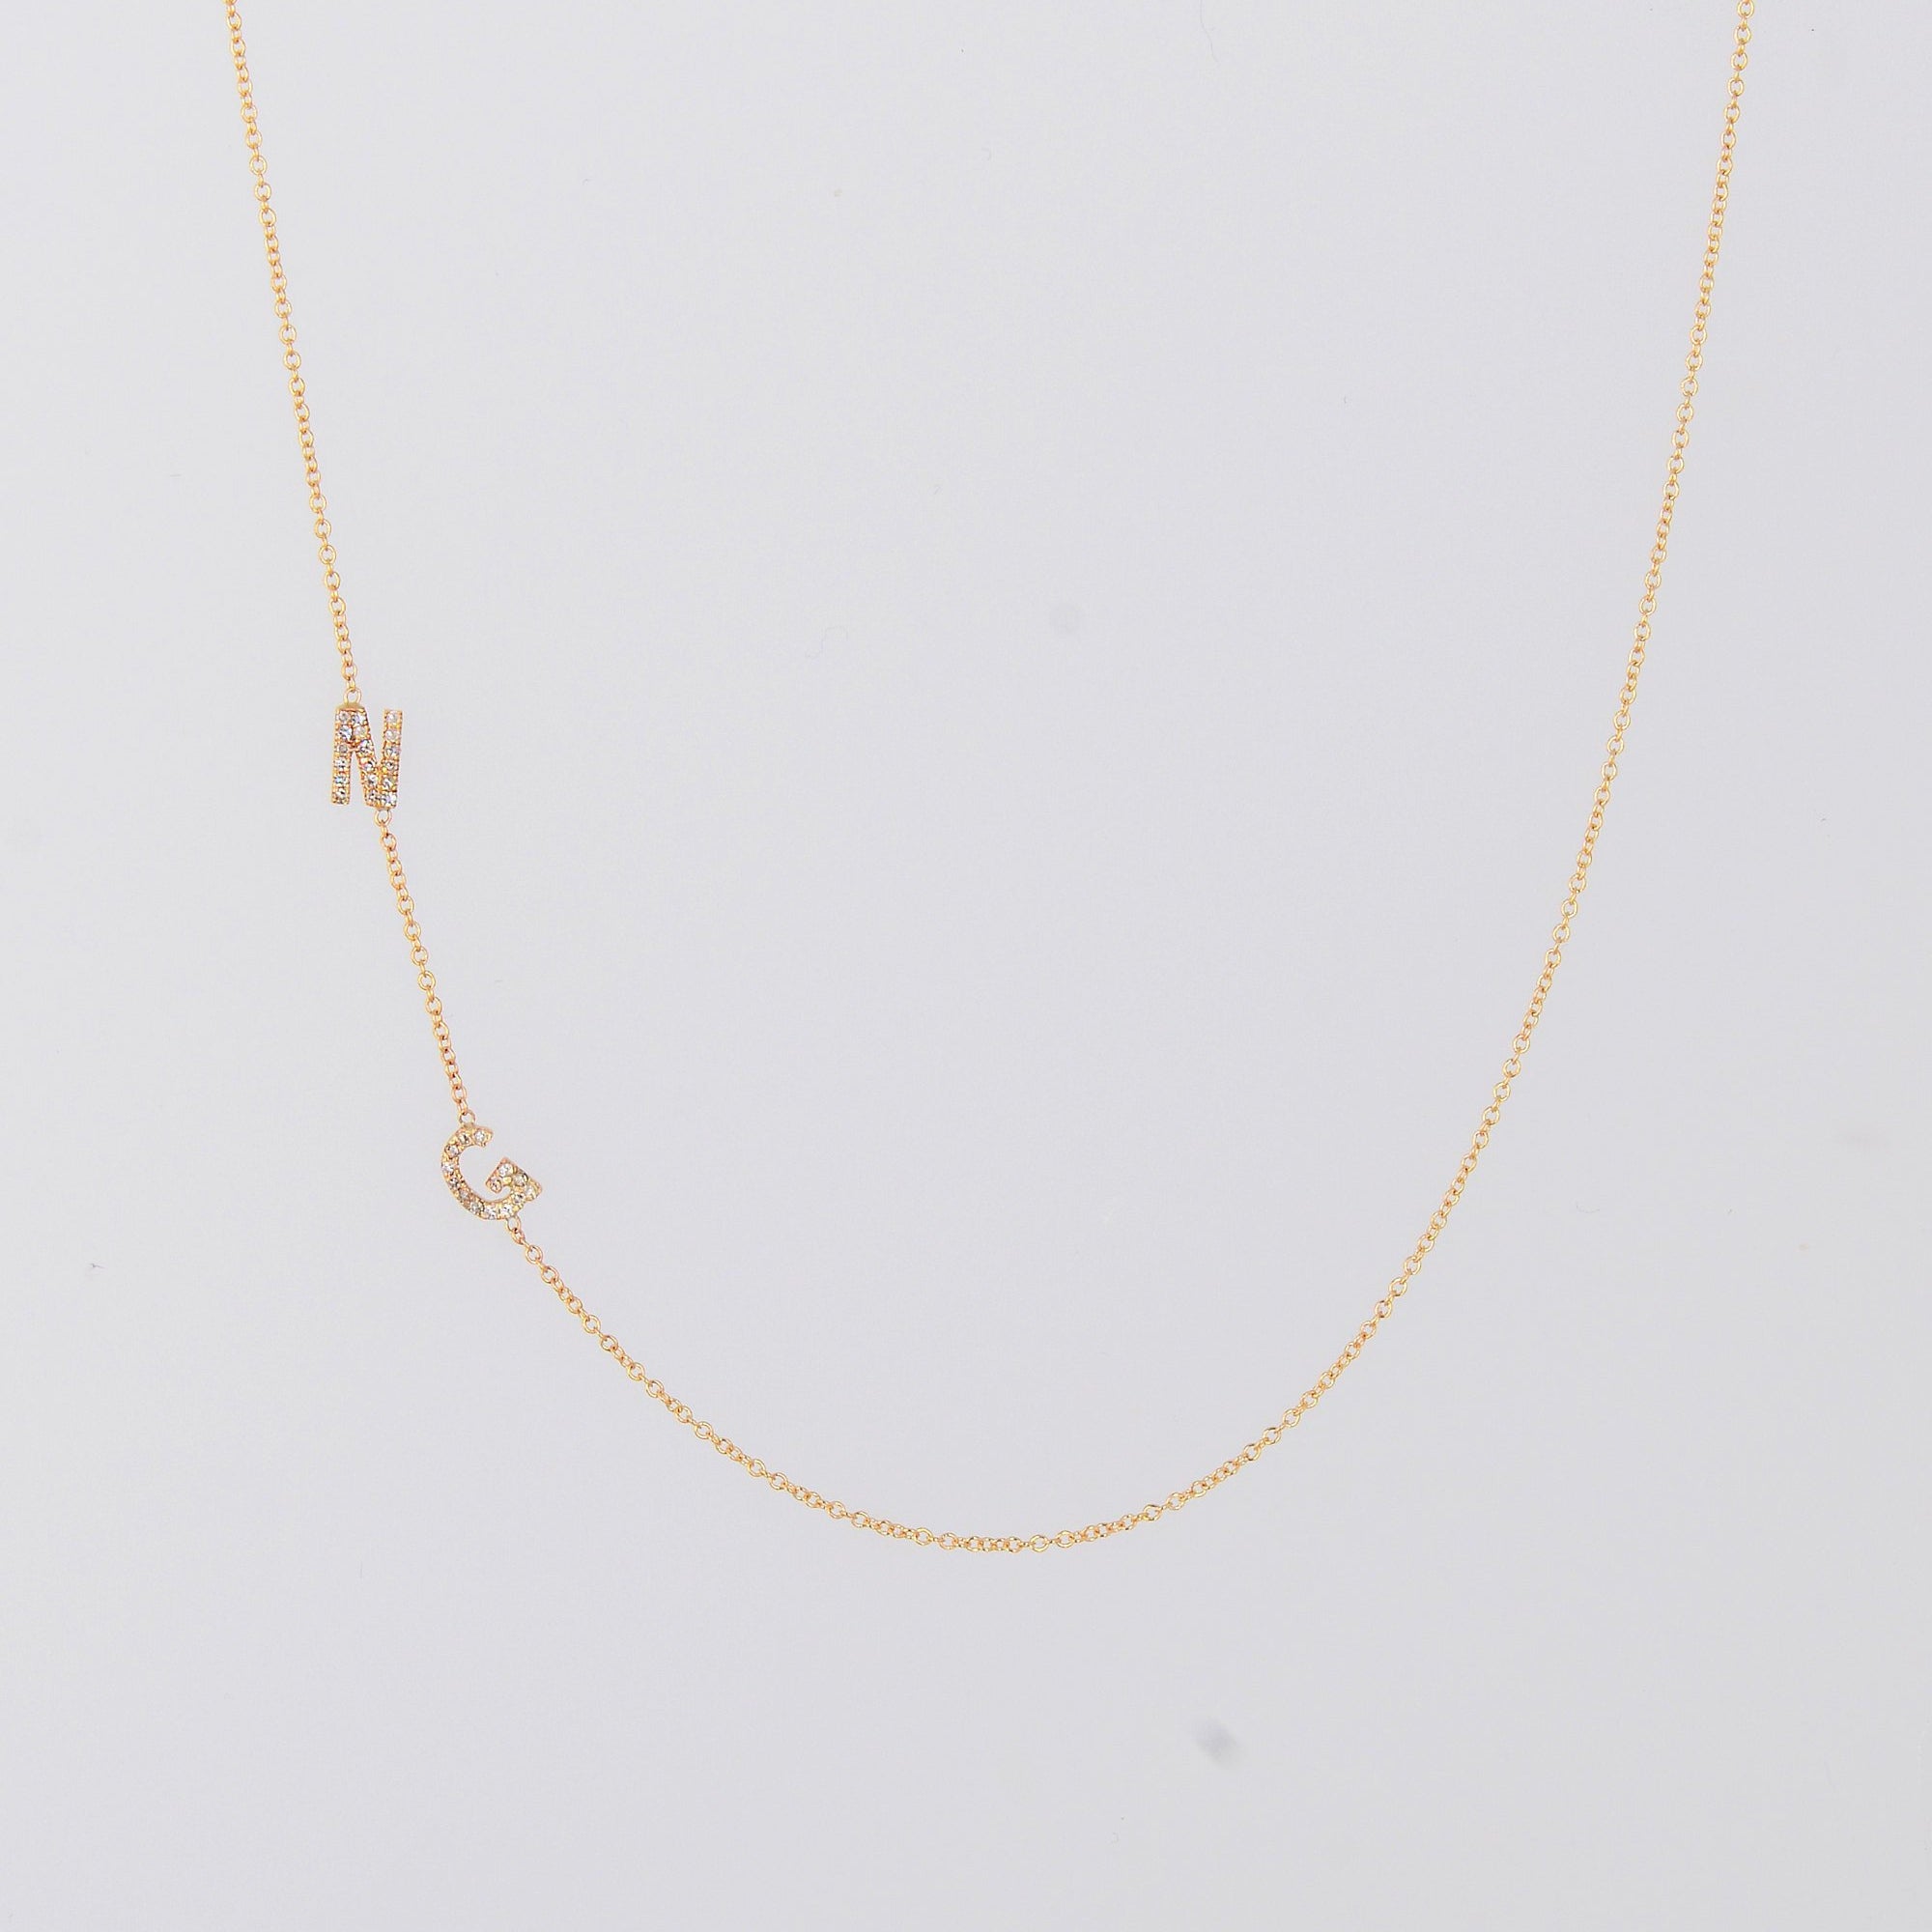 Meghan Markle Initial Necklace, Asymmetrical Initials Necklace